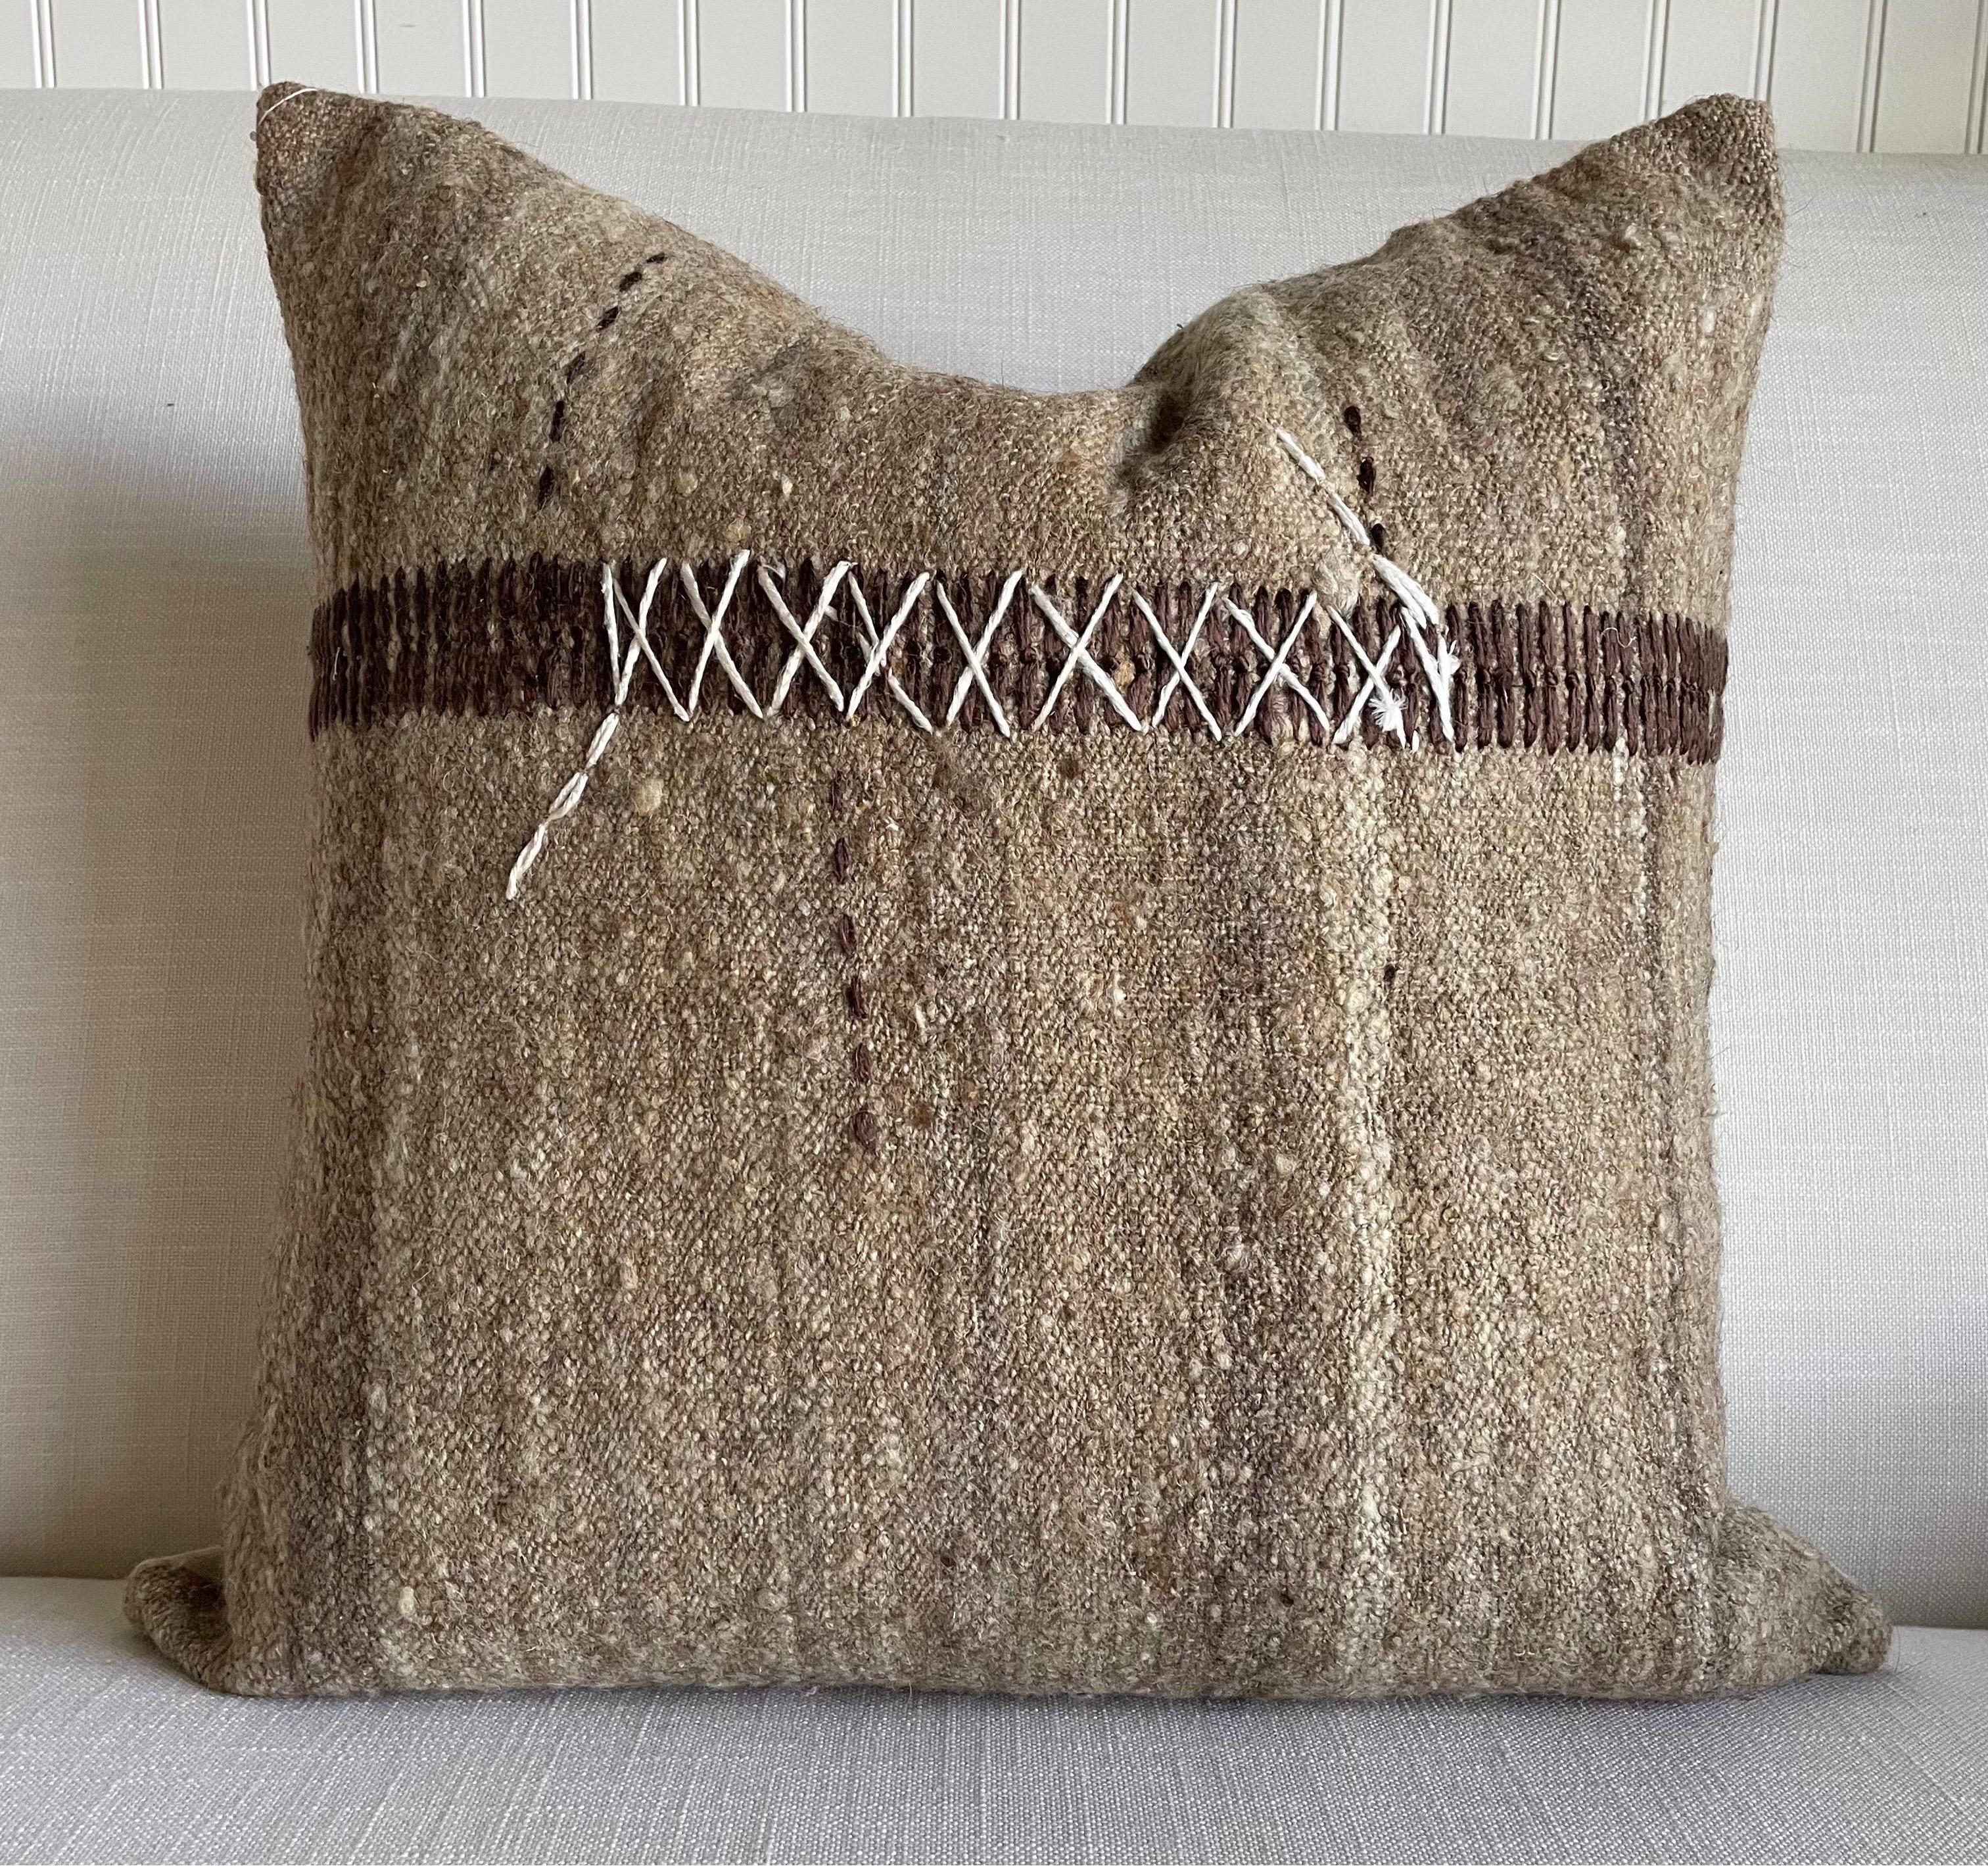 Hudson Accent pillow
Beautiful neutral warm brown tones, woven with a thick soft nubby texture.
Size: 22